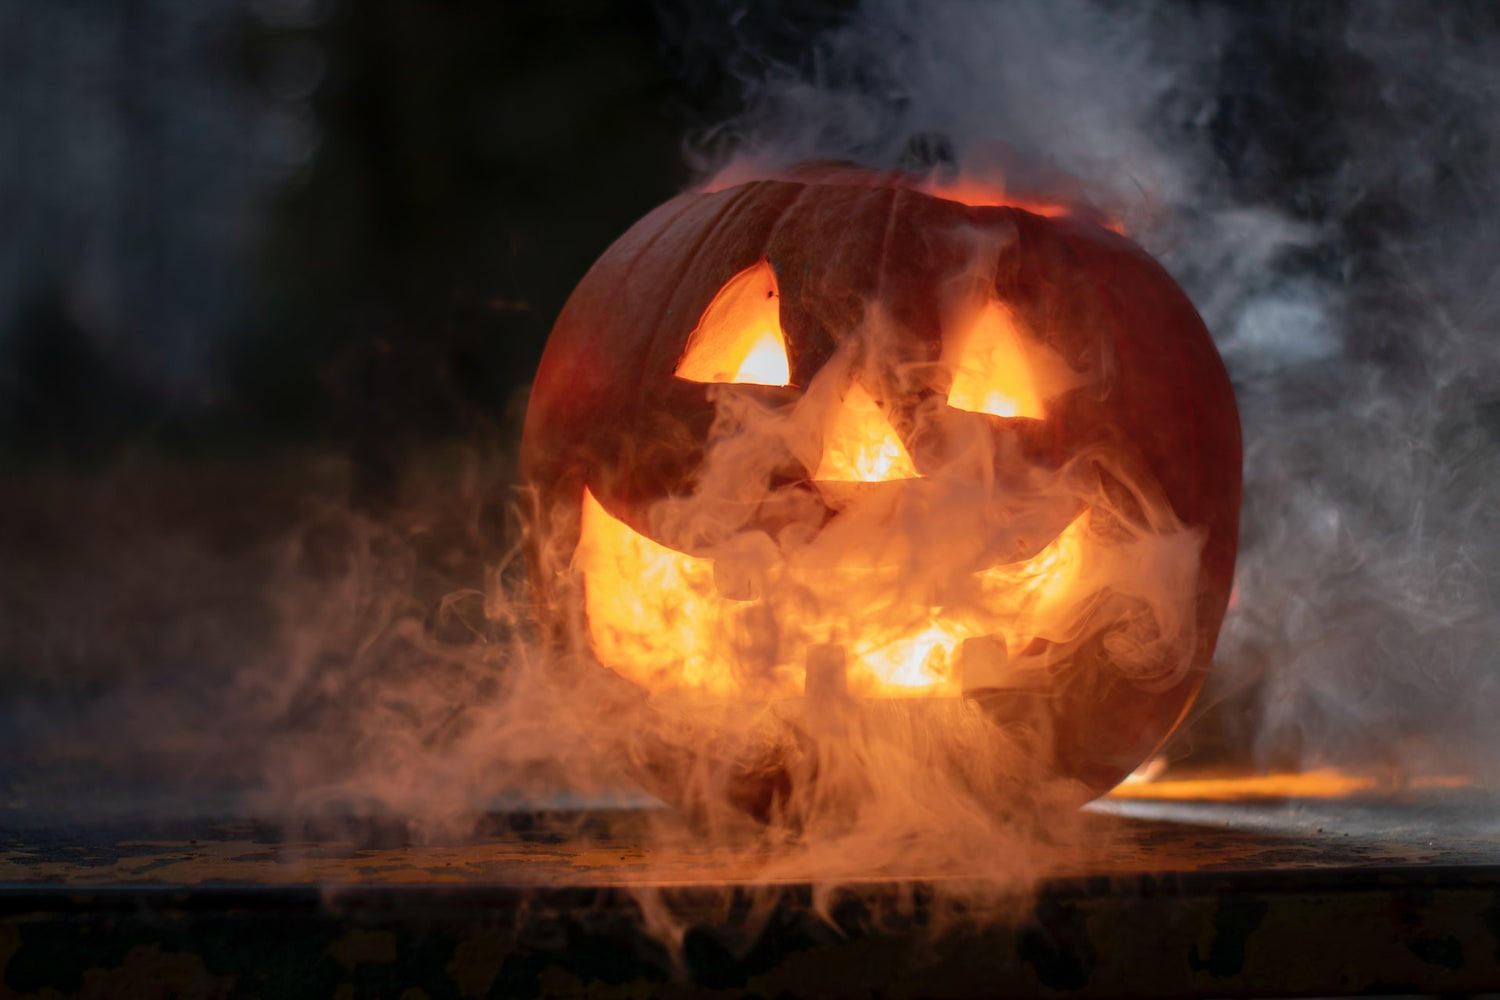 Scary face on a pumpkin with smoke around it